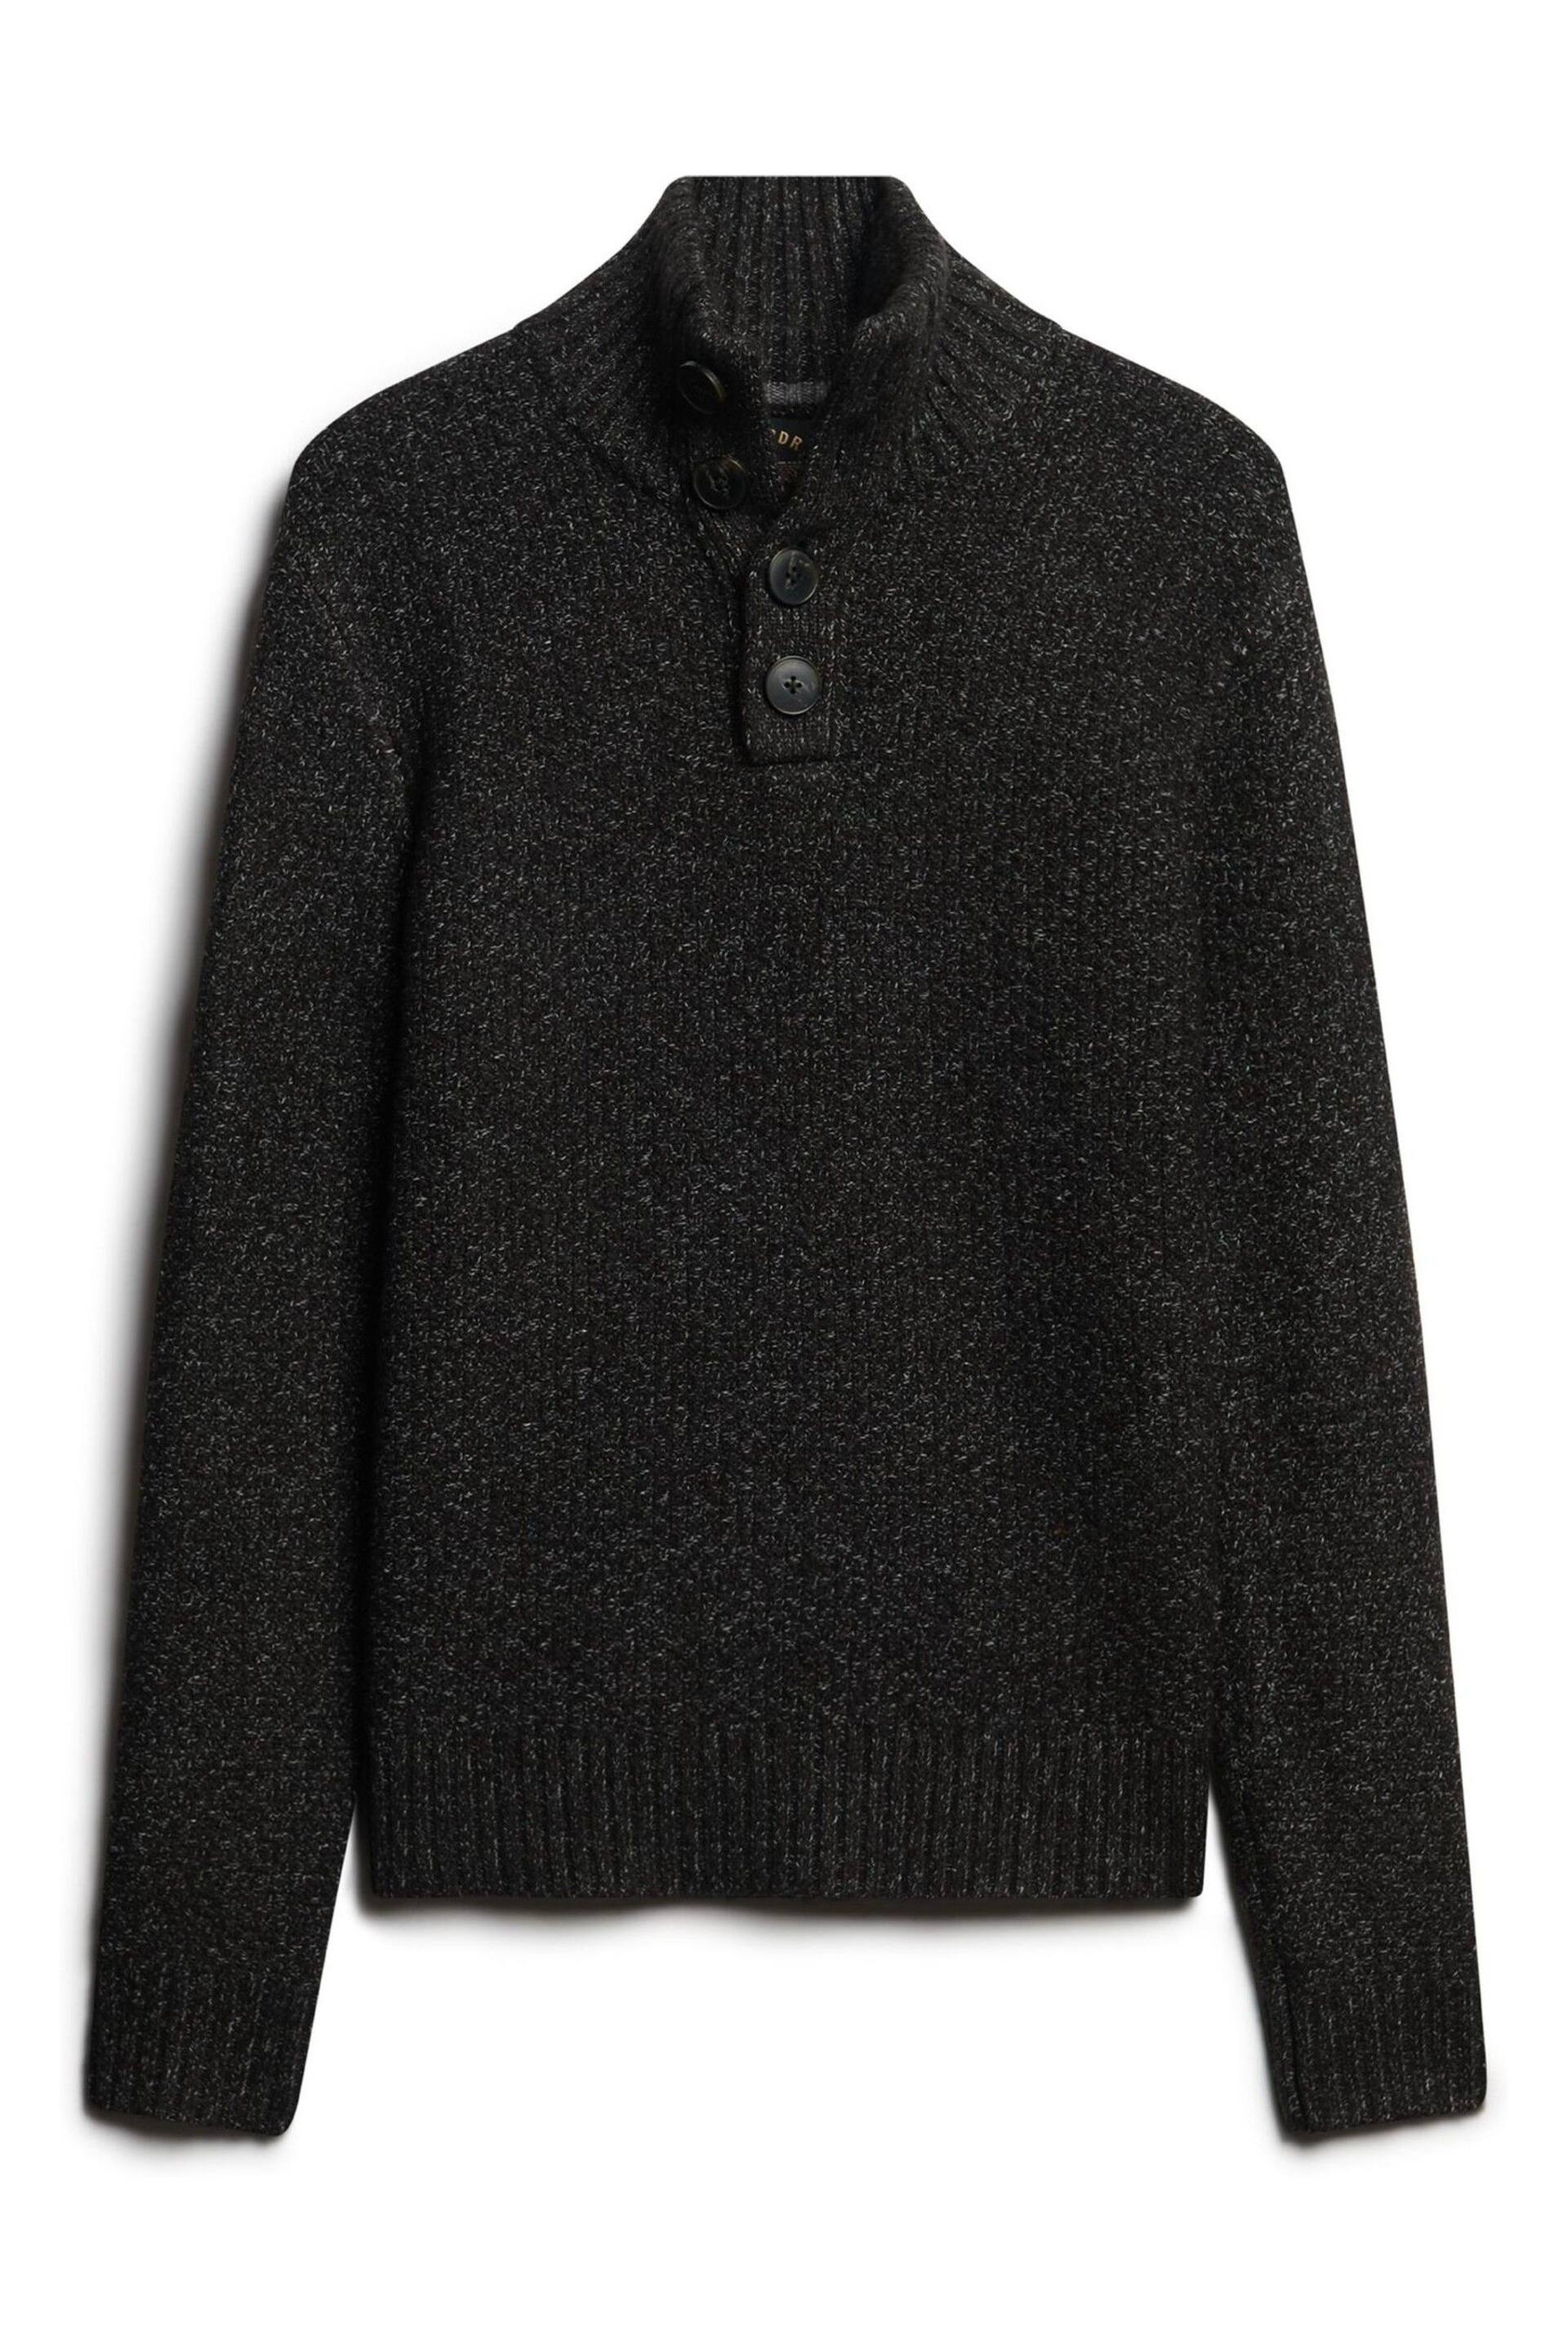 Superdry Black Chunky Button High Neck Jumper - Image 4 of 6